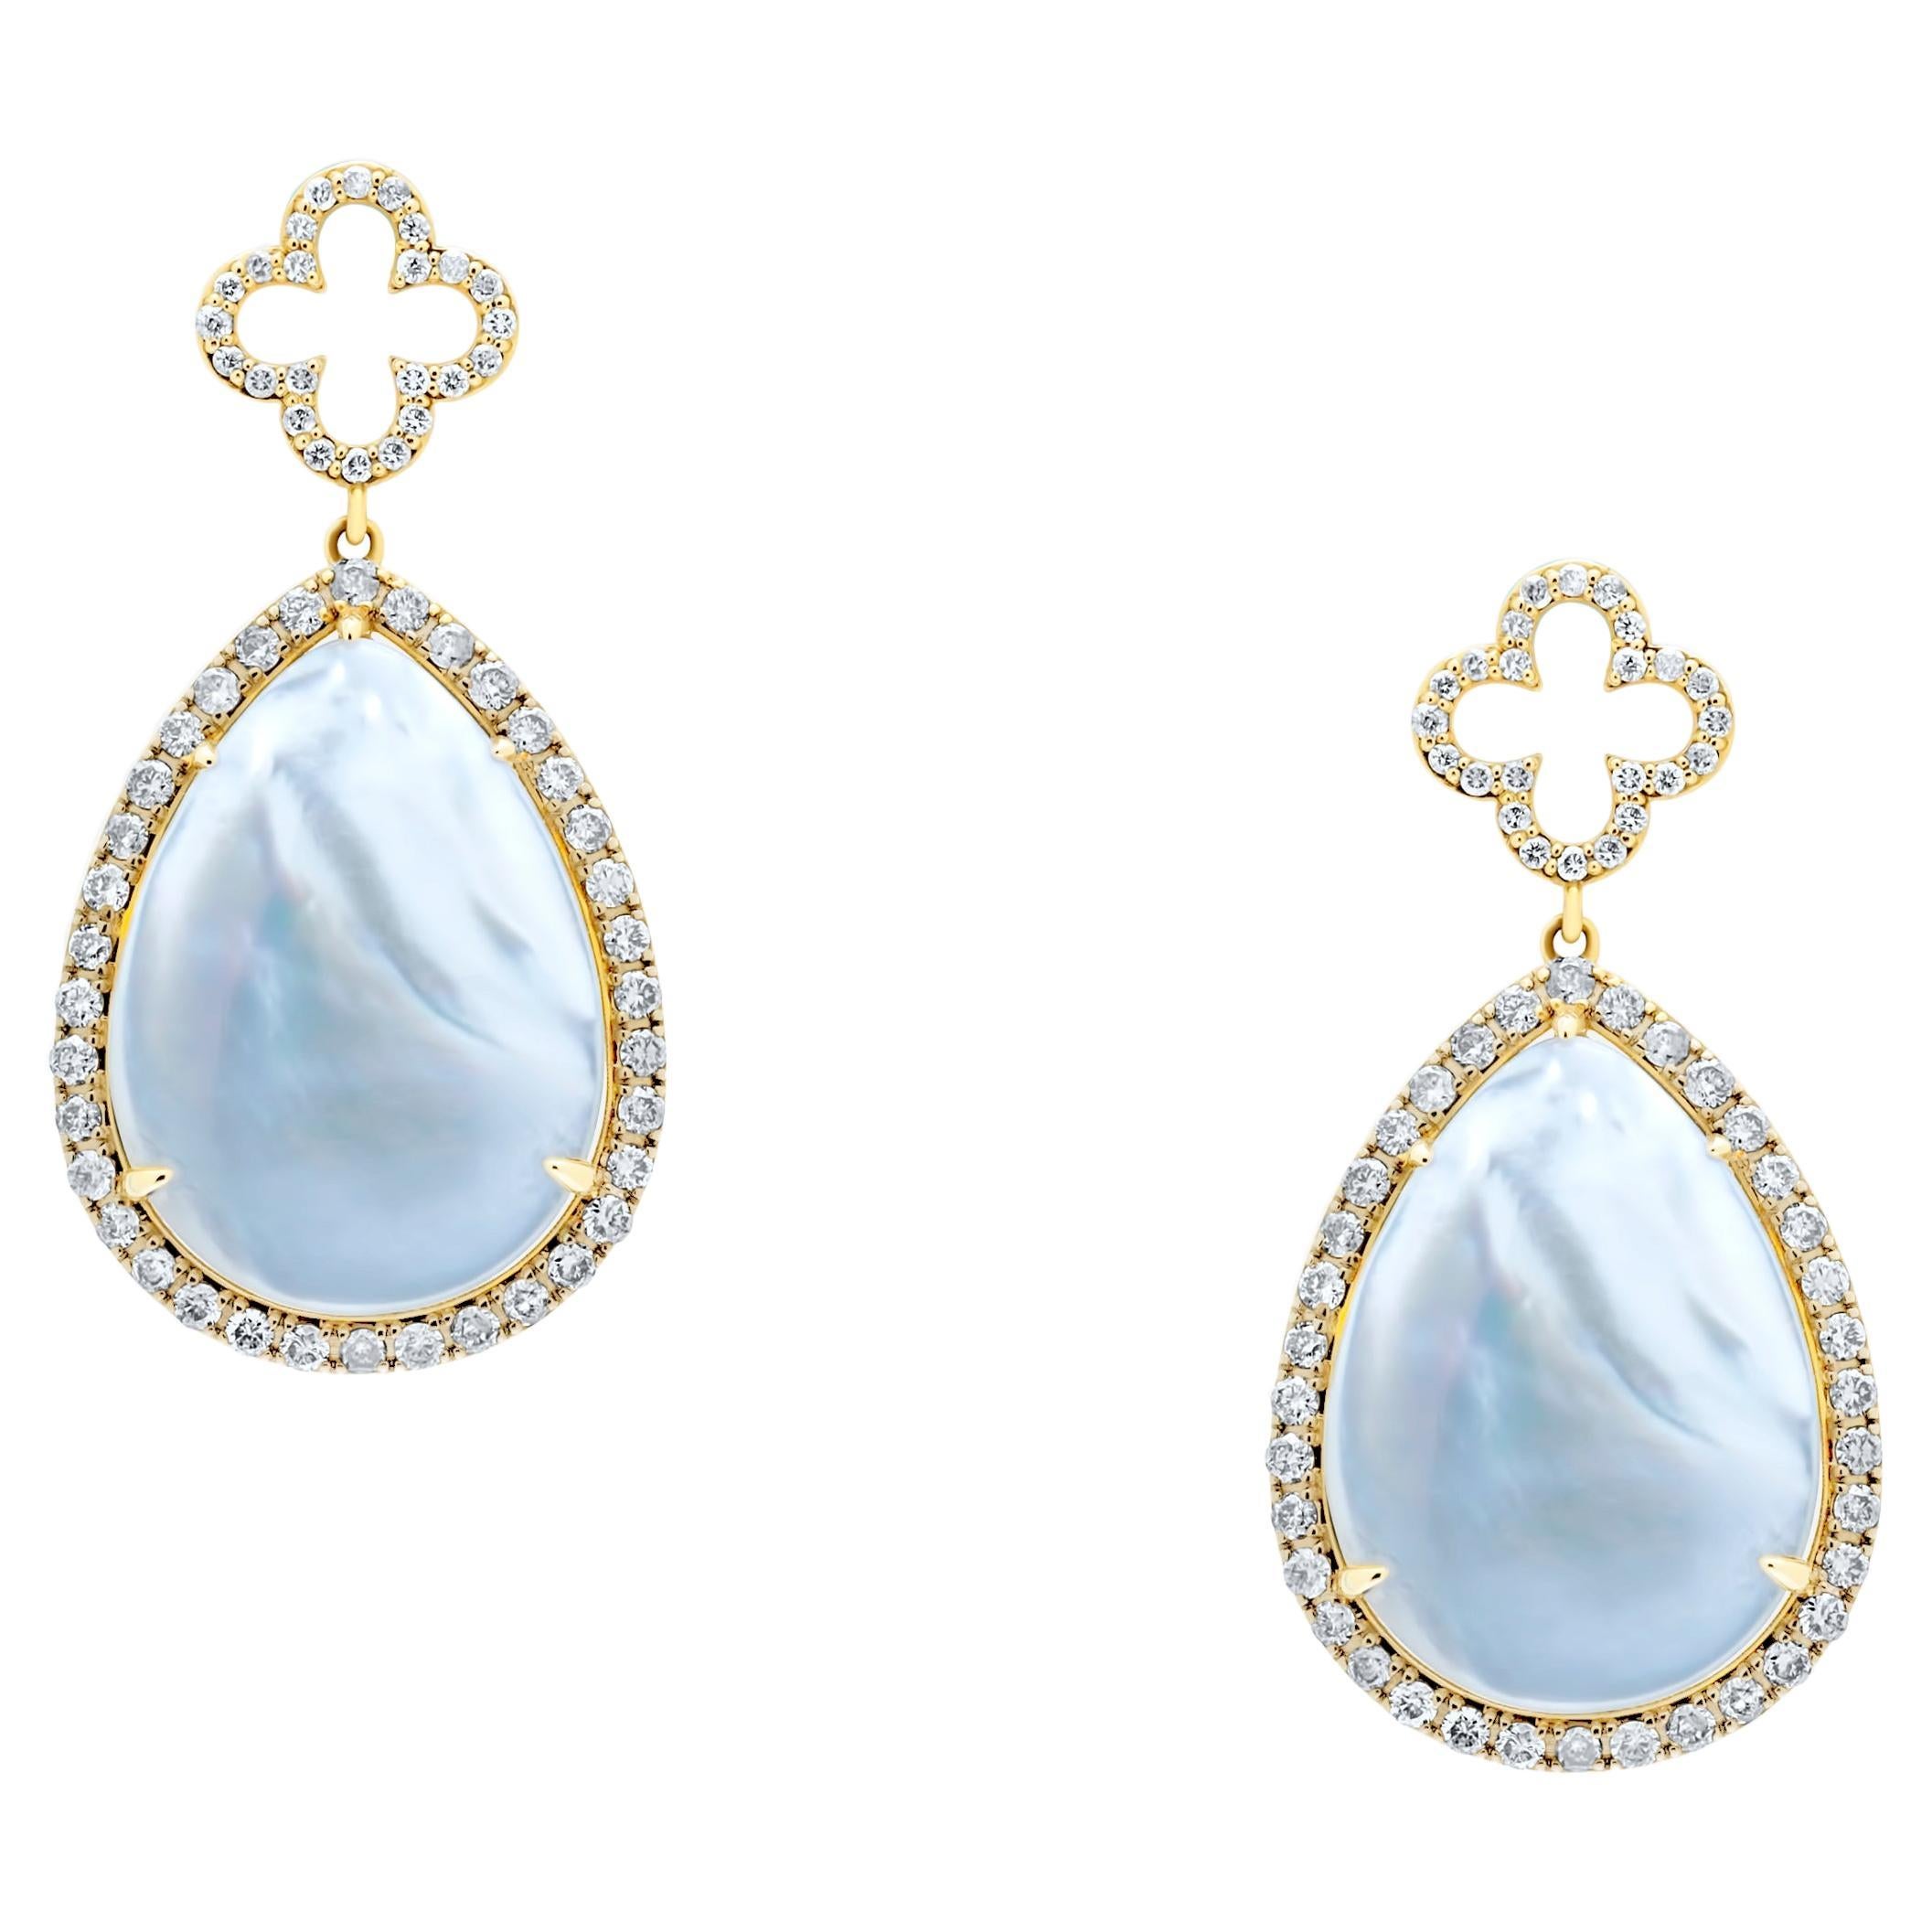 Mother of Pearl Clover Cognac Silver White Diamonds Halo Drop 14K Gold Earrings
14 Karat Yellow Gold
2.00 CT Diamonds
White Cream Colored Mother-of-Pearl Cabochon Slices